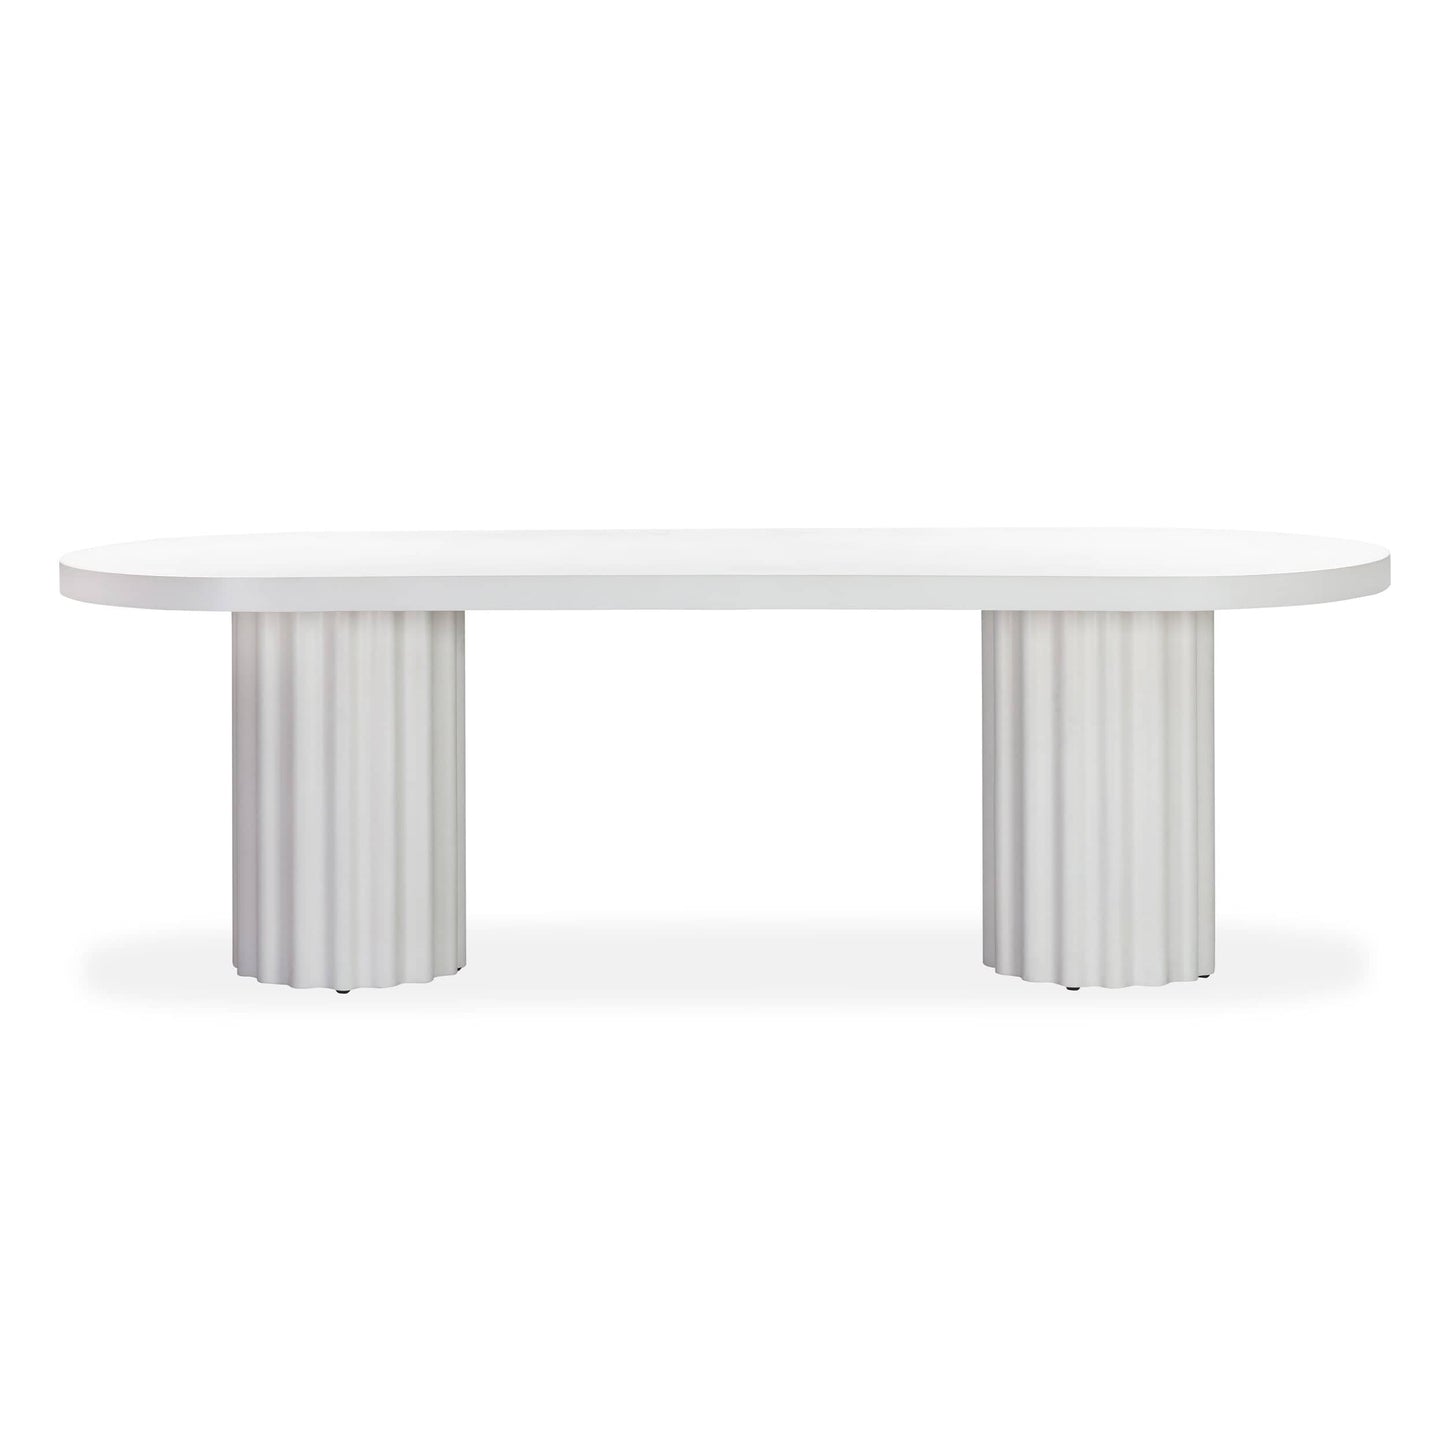 Flock Outdoor Dining Table 240Cm - White Concrete